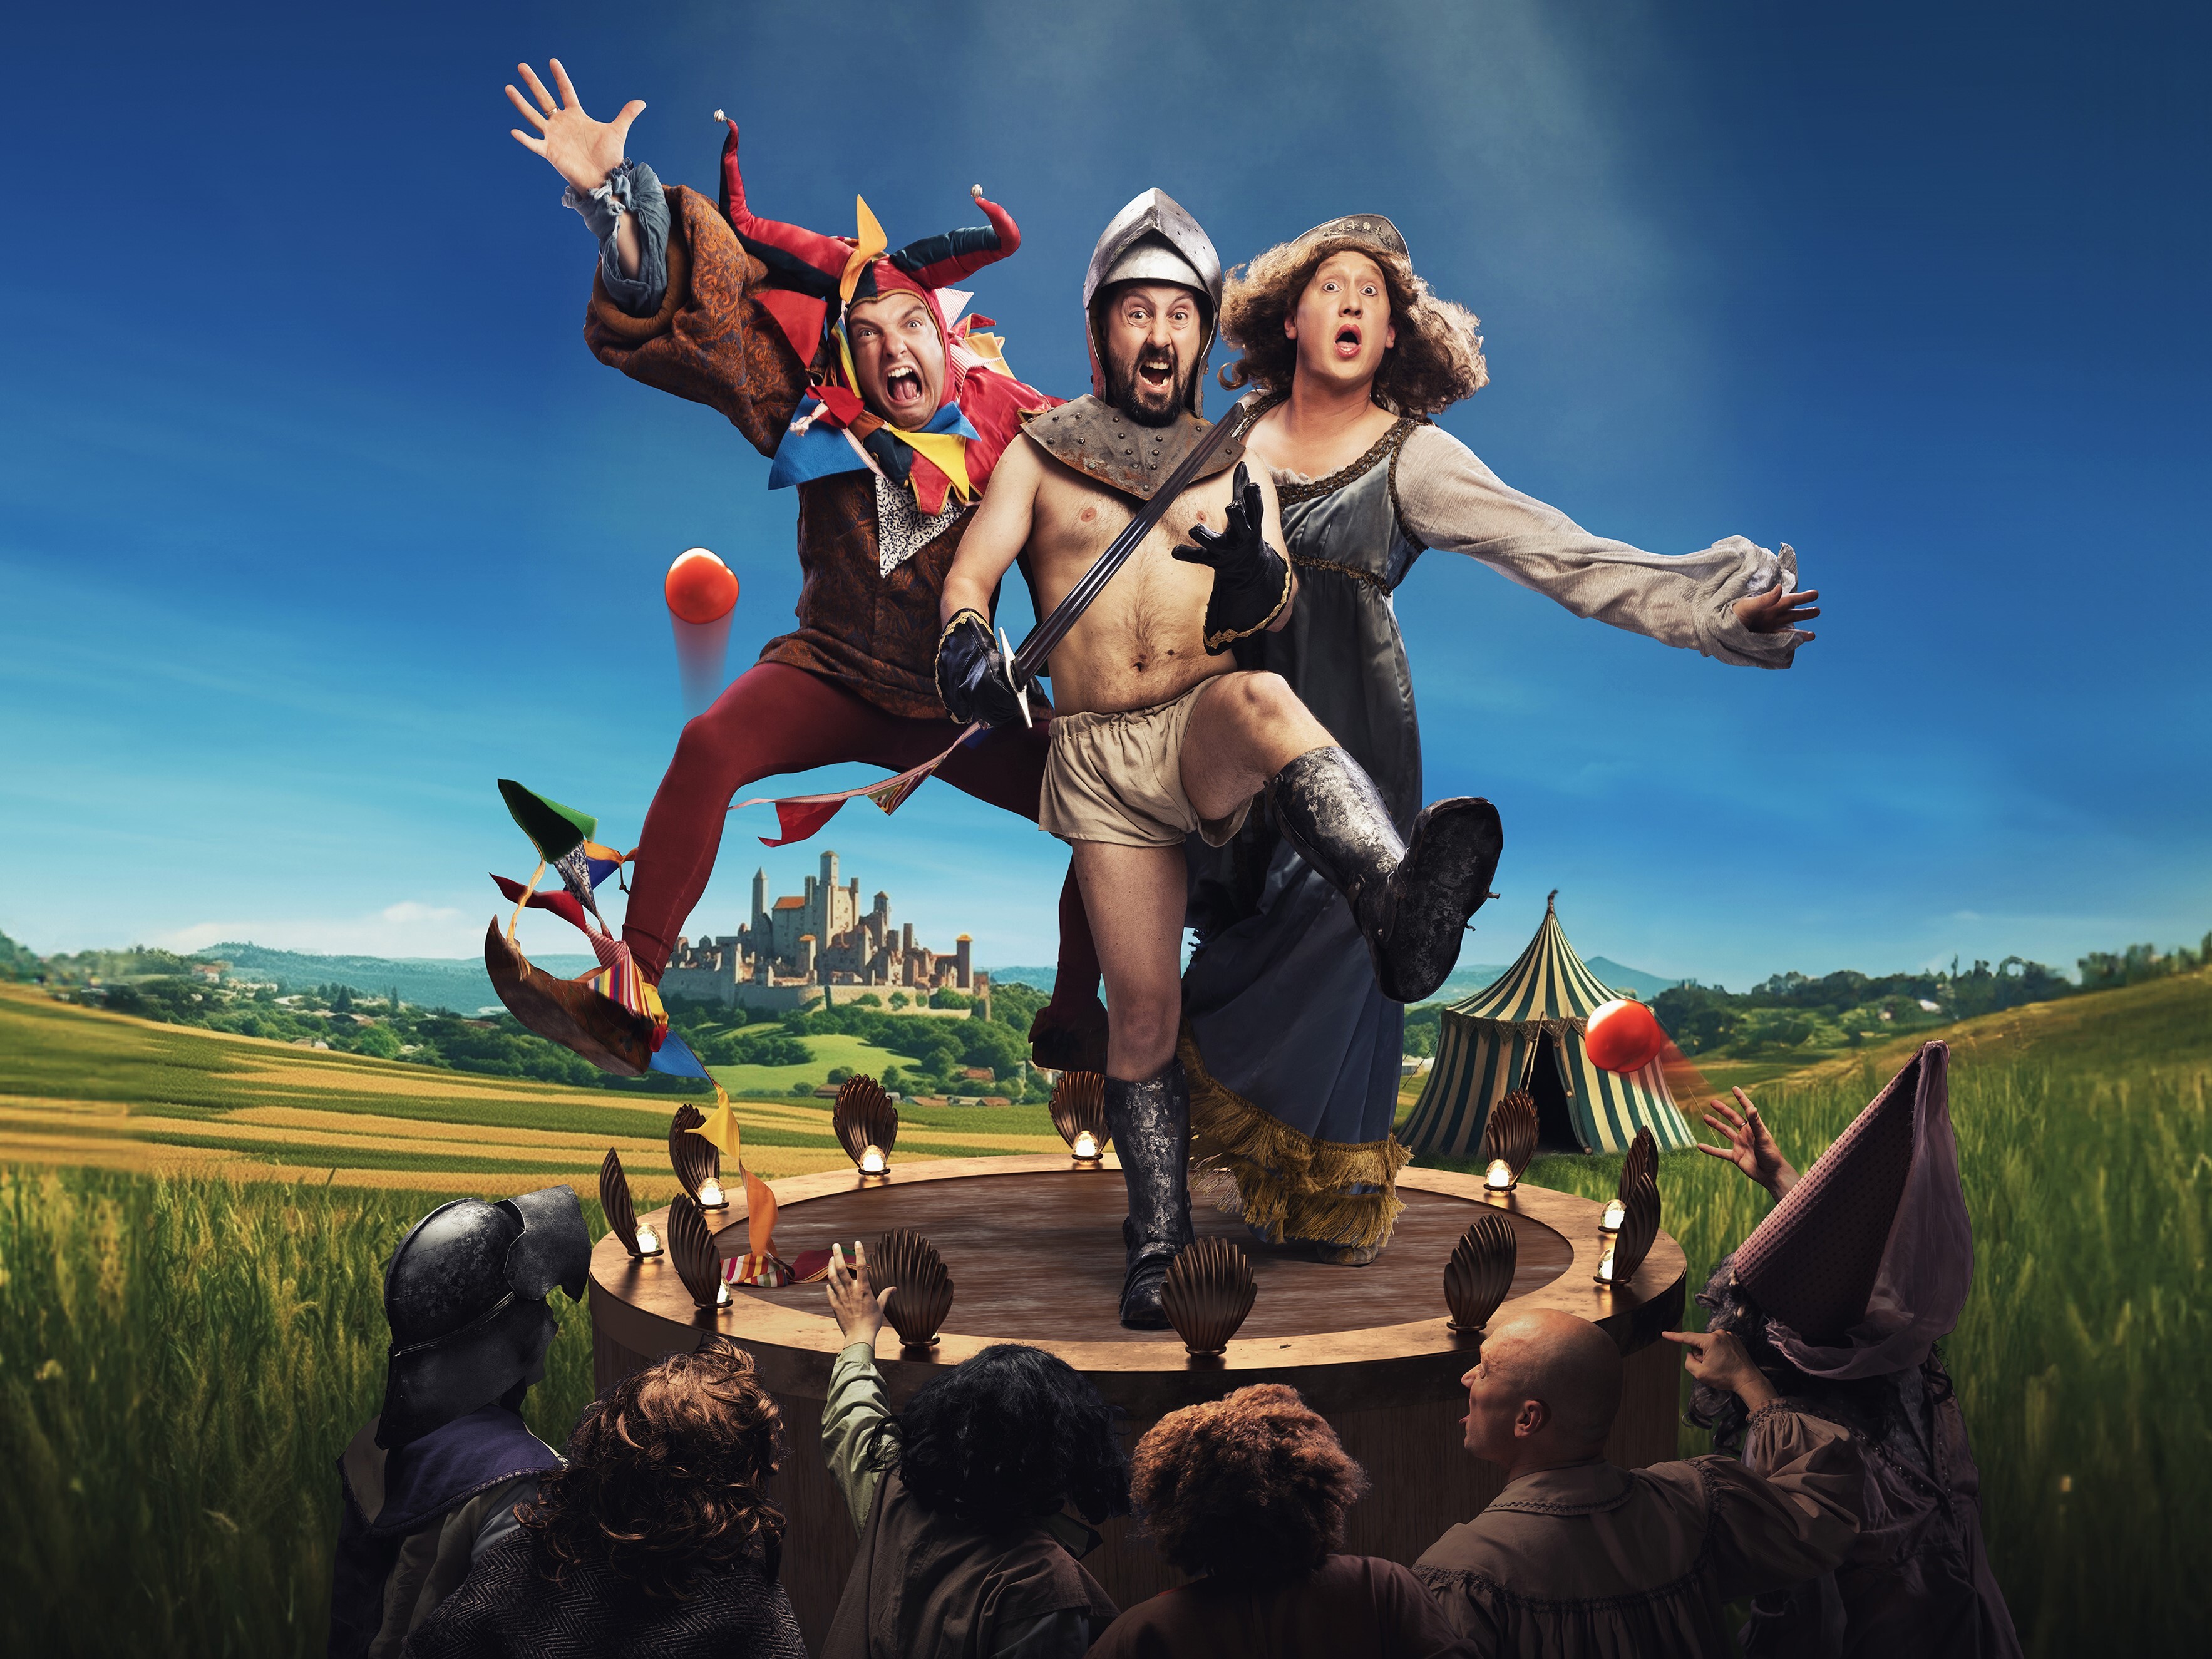 A jester, a knight in underwear and a maiden are standing on top of a wooden circular structure. There are six people below them looking up at them. A medieval tent and view of the town and countryside are in the background.